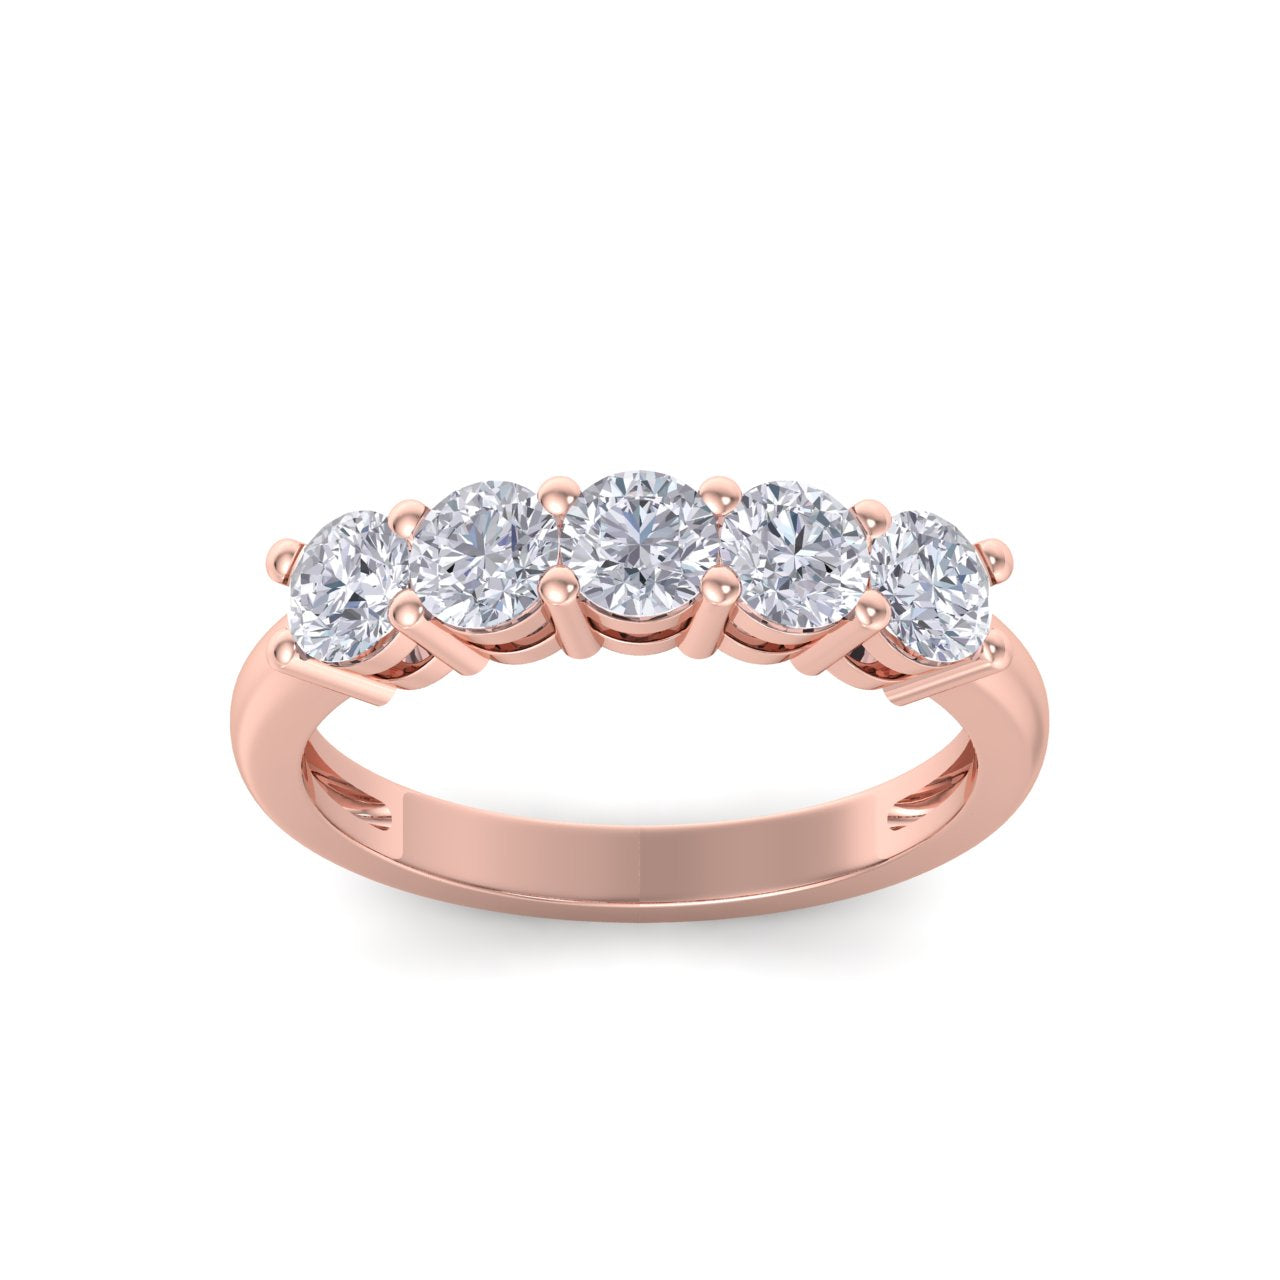 Wedding ring in rose gold with white diamonds of 1.45 ct in weight